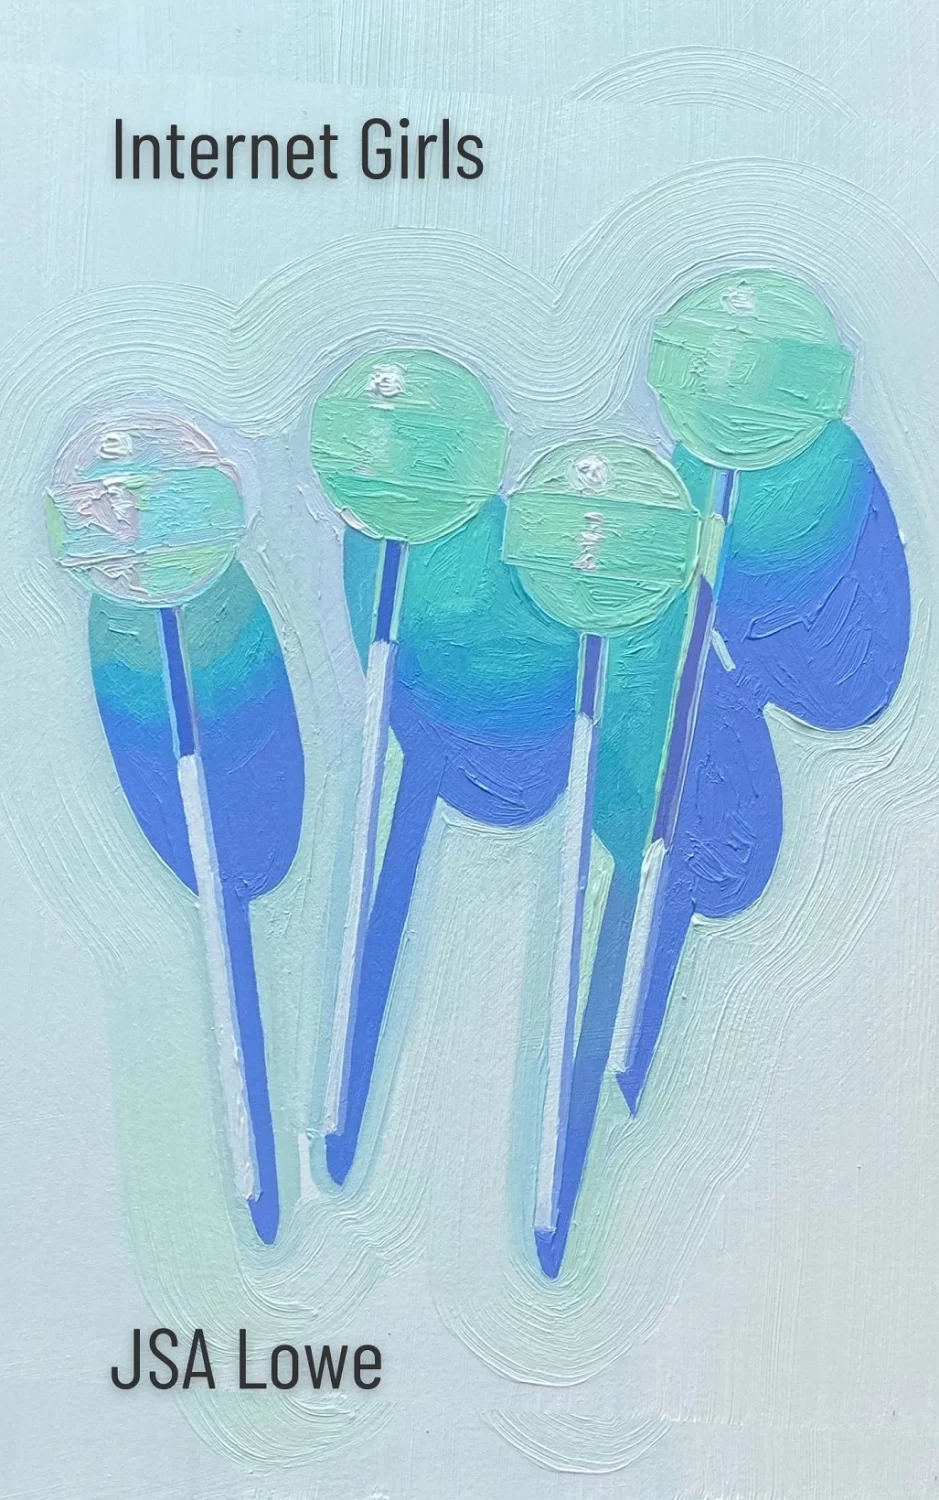 Image of four aqua-colored lollipops. In black, the text 'Internet Girls' by JSA Lowe.